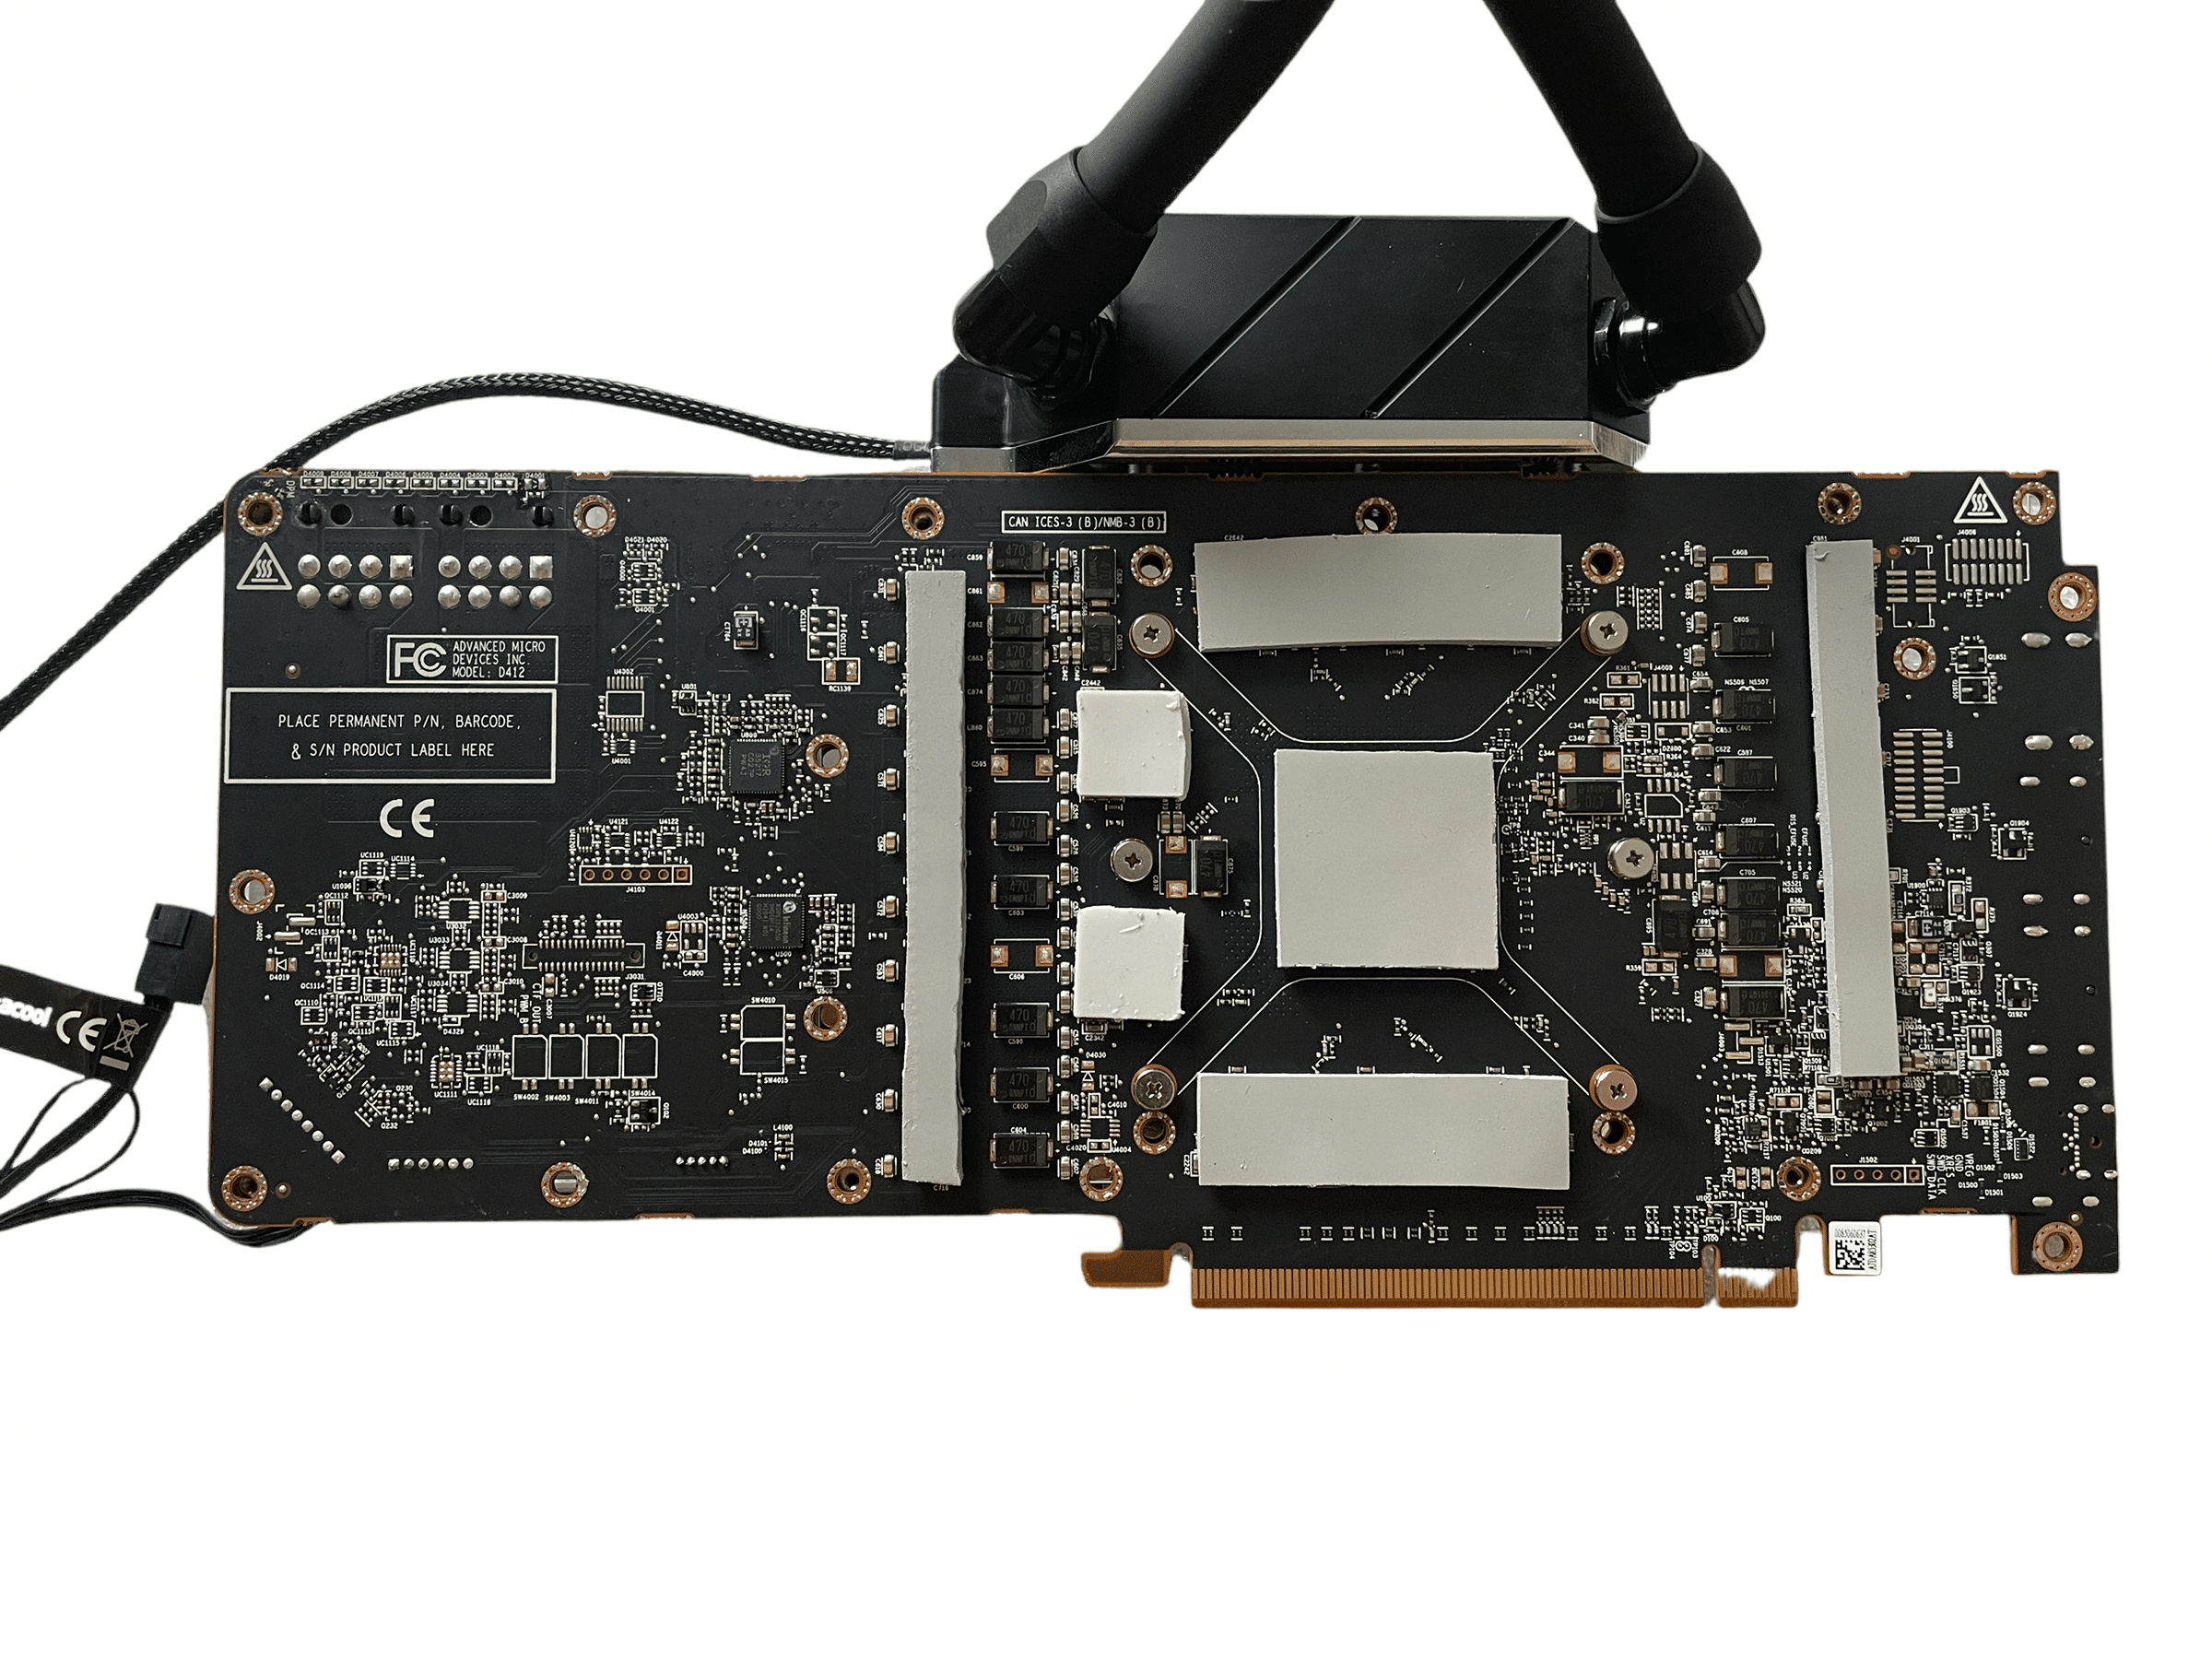 Alphacool English - A further review with the Alphacool Eiswolf 2 GPU AIO  from Igors Lab. 2080Ti with 380W . no problem ;-)